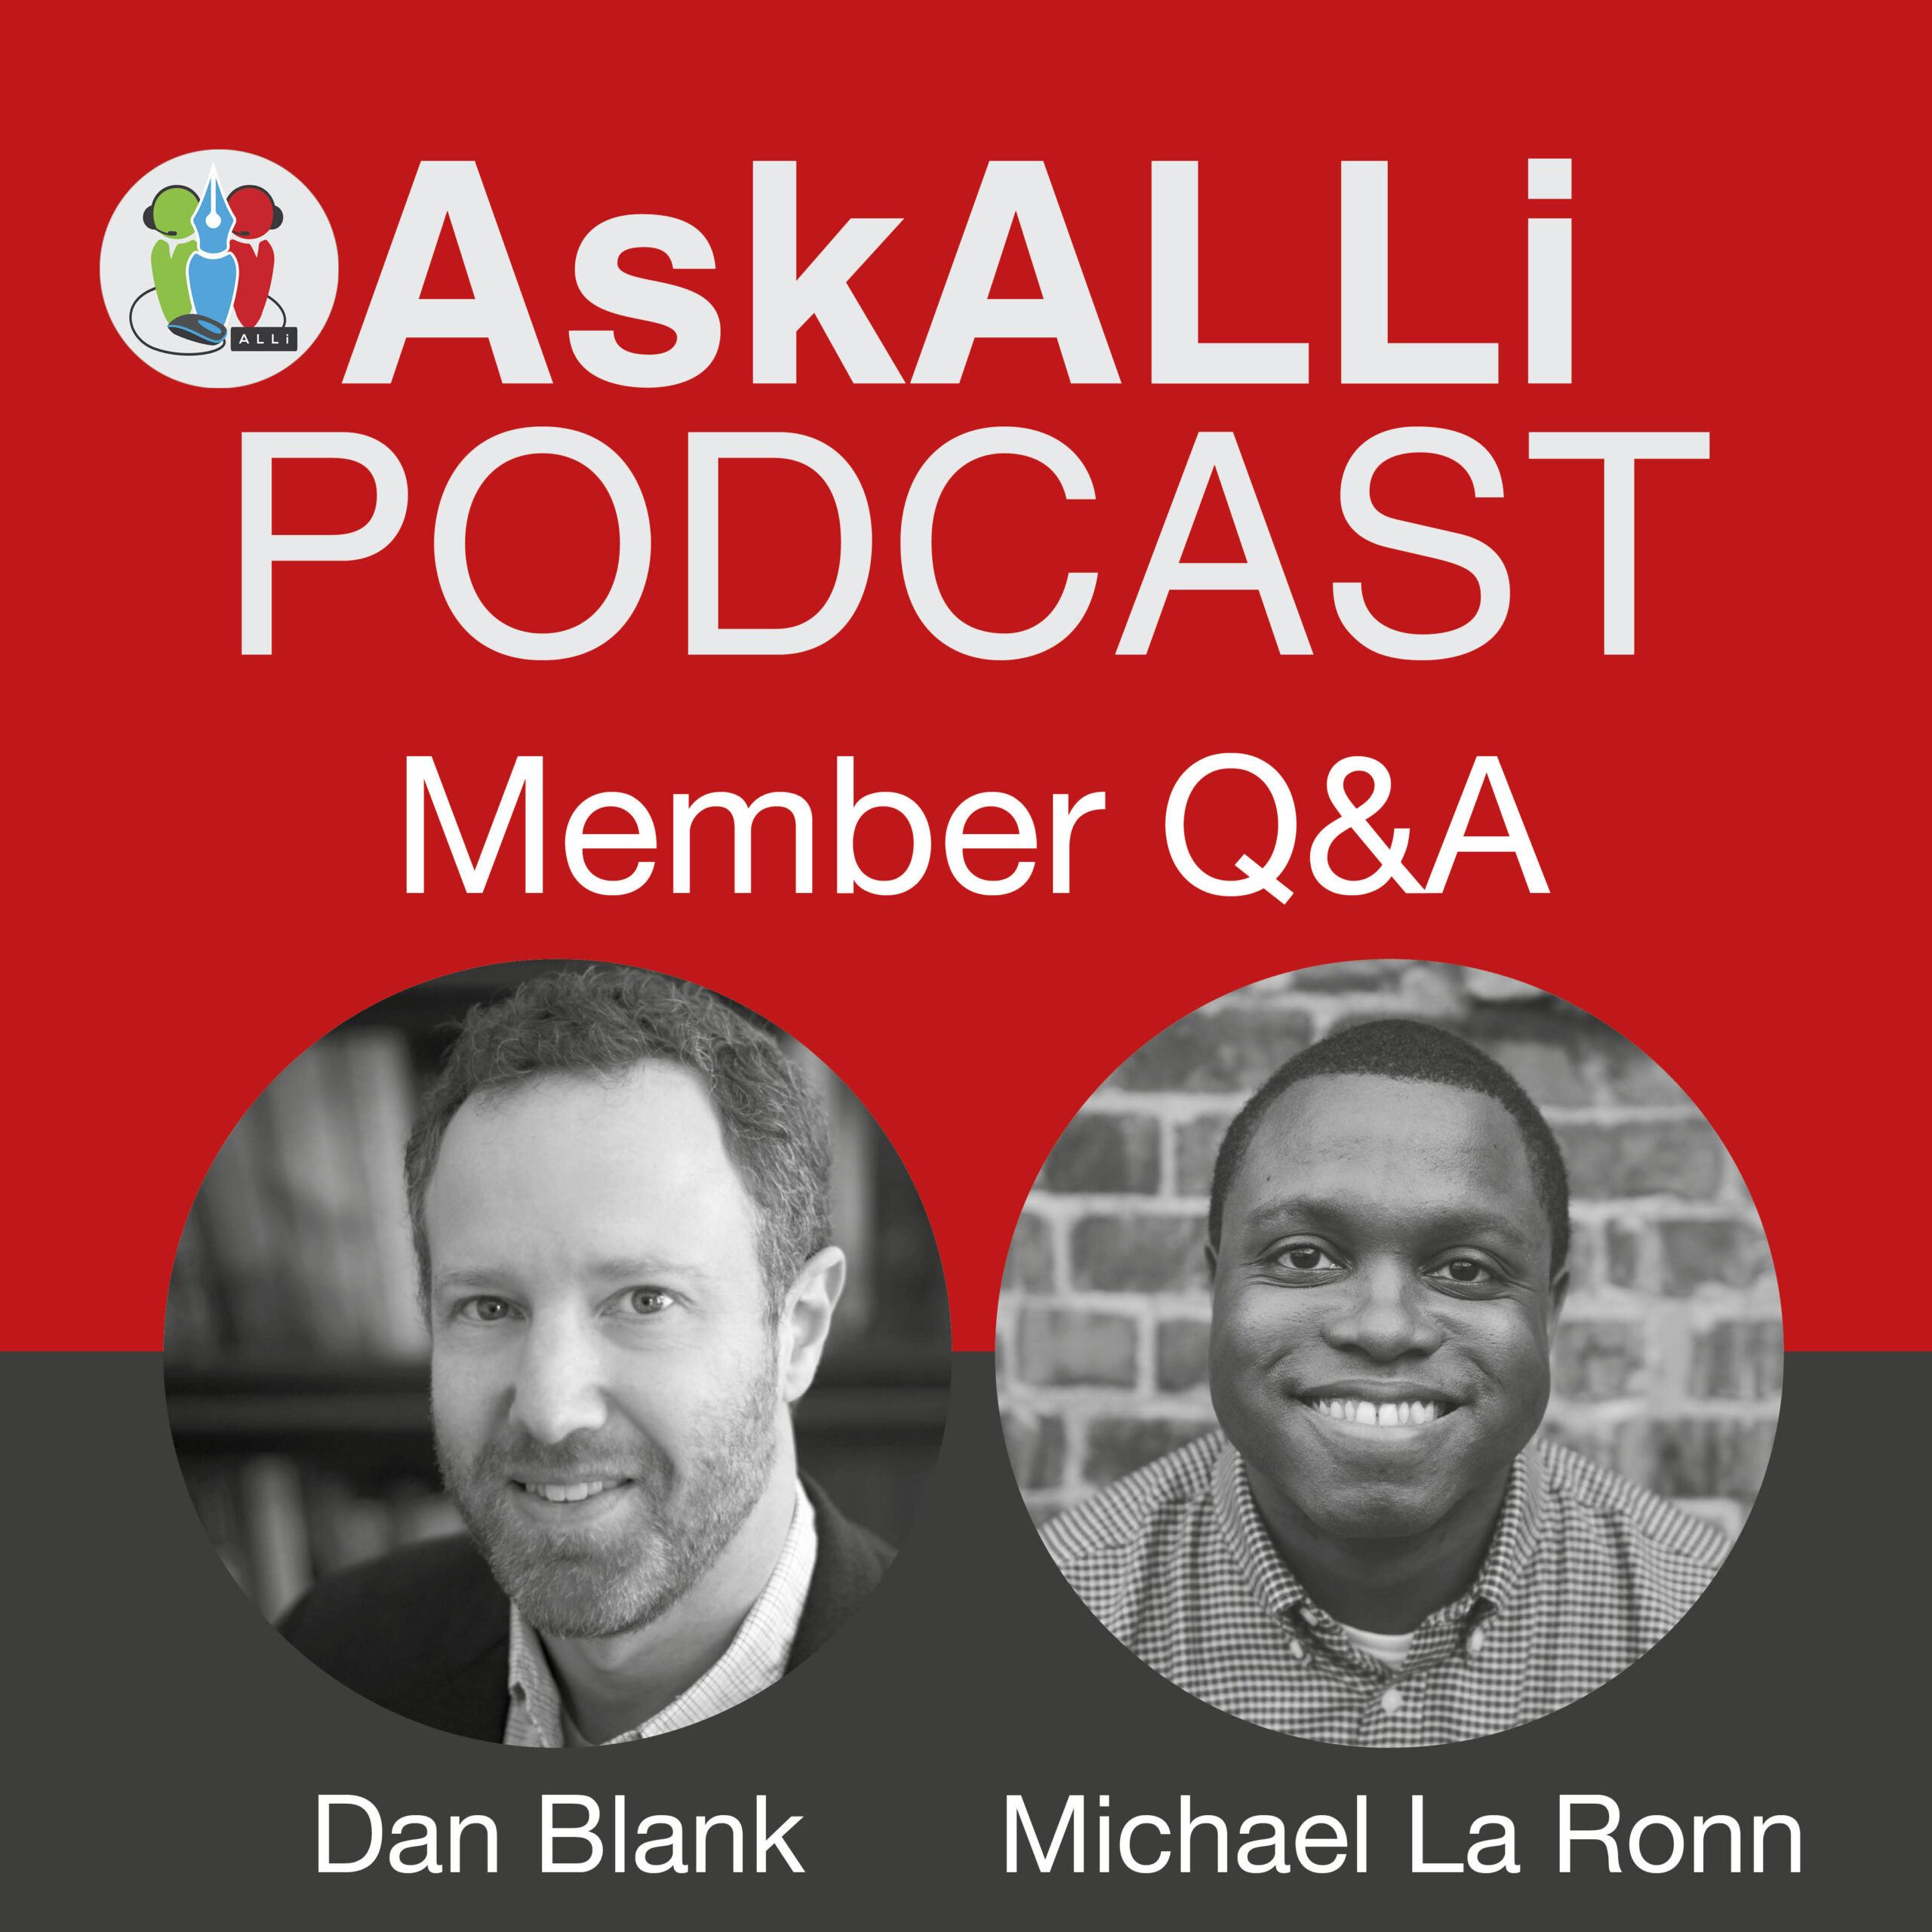 What Is Your 2019 Self-Publishing Goal? AskALLi Members’ Q&A January 2019